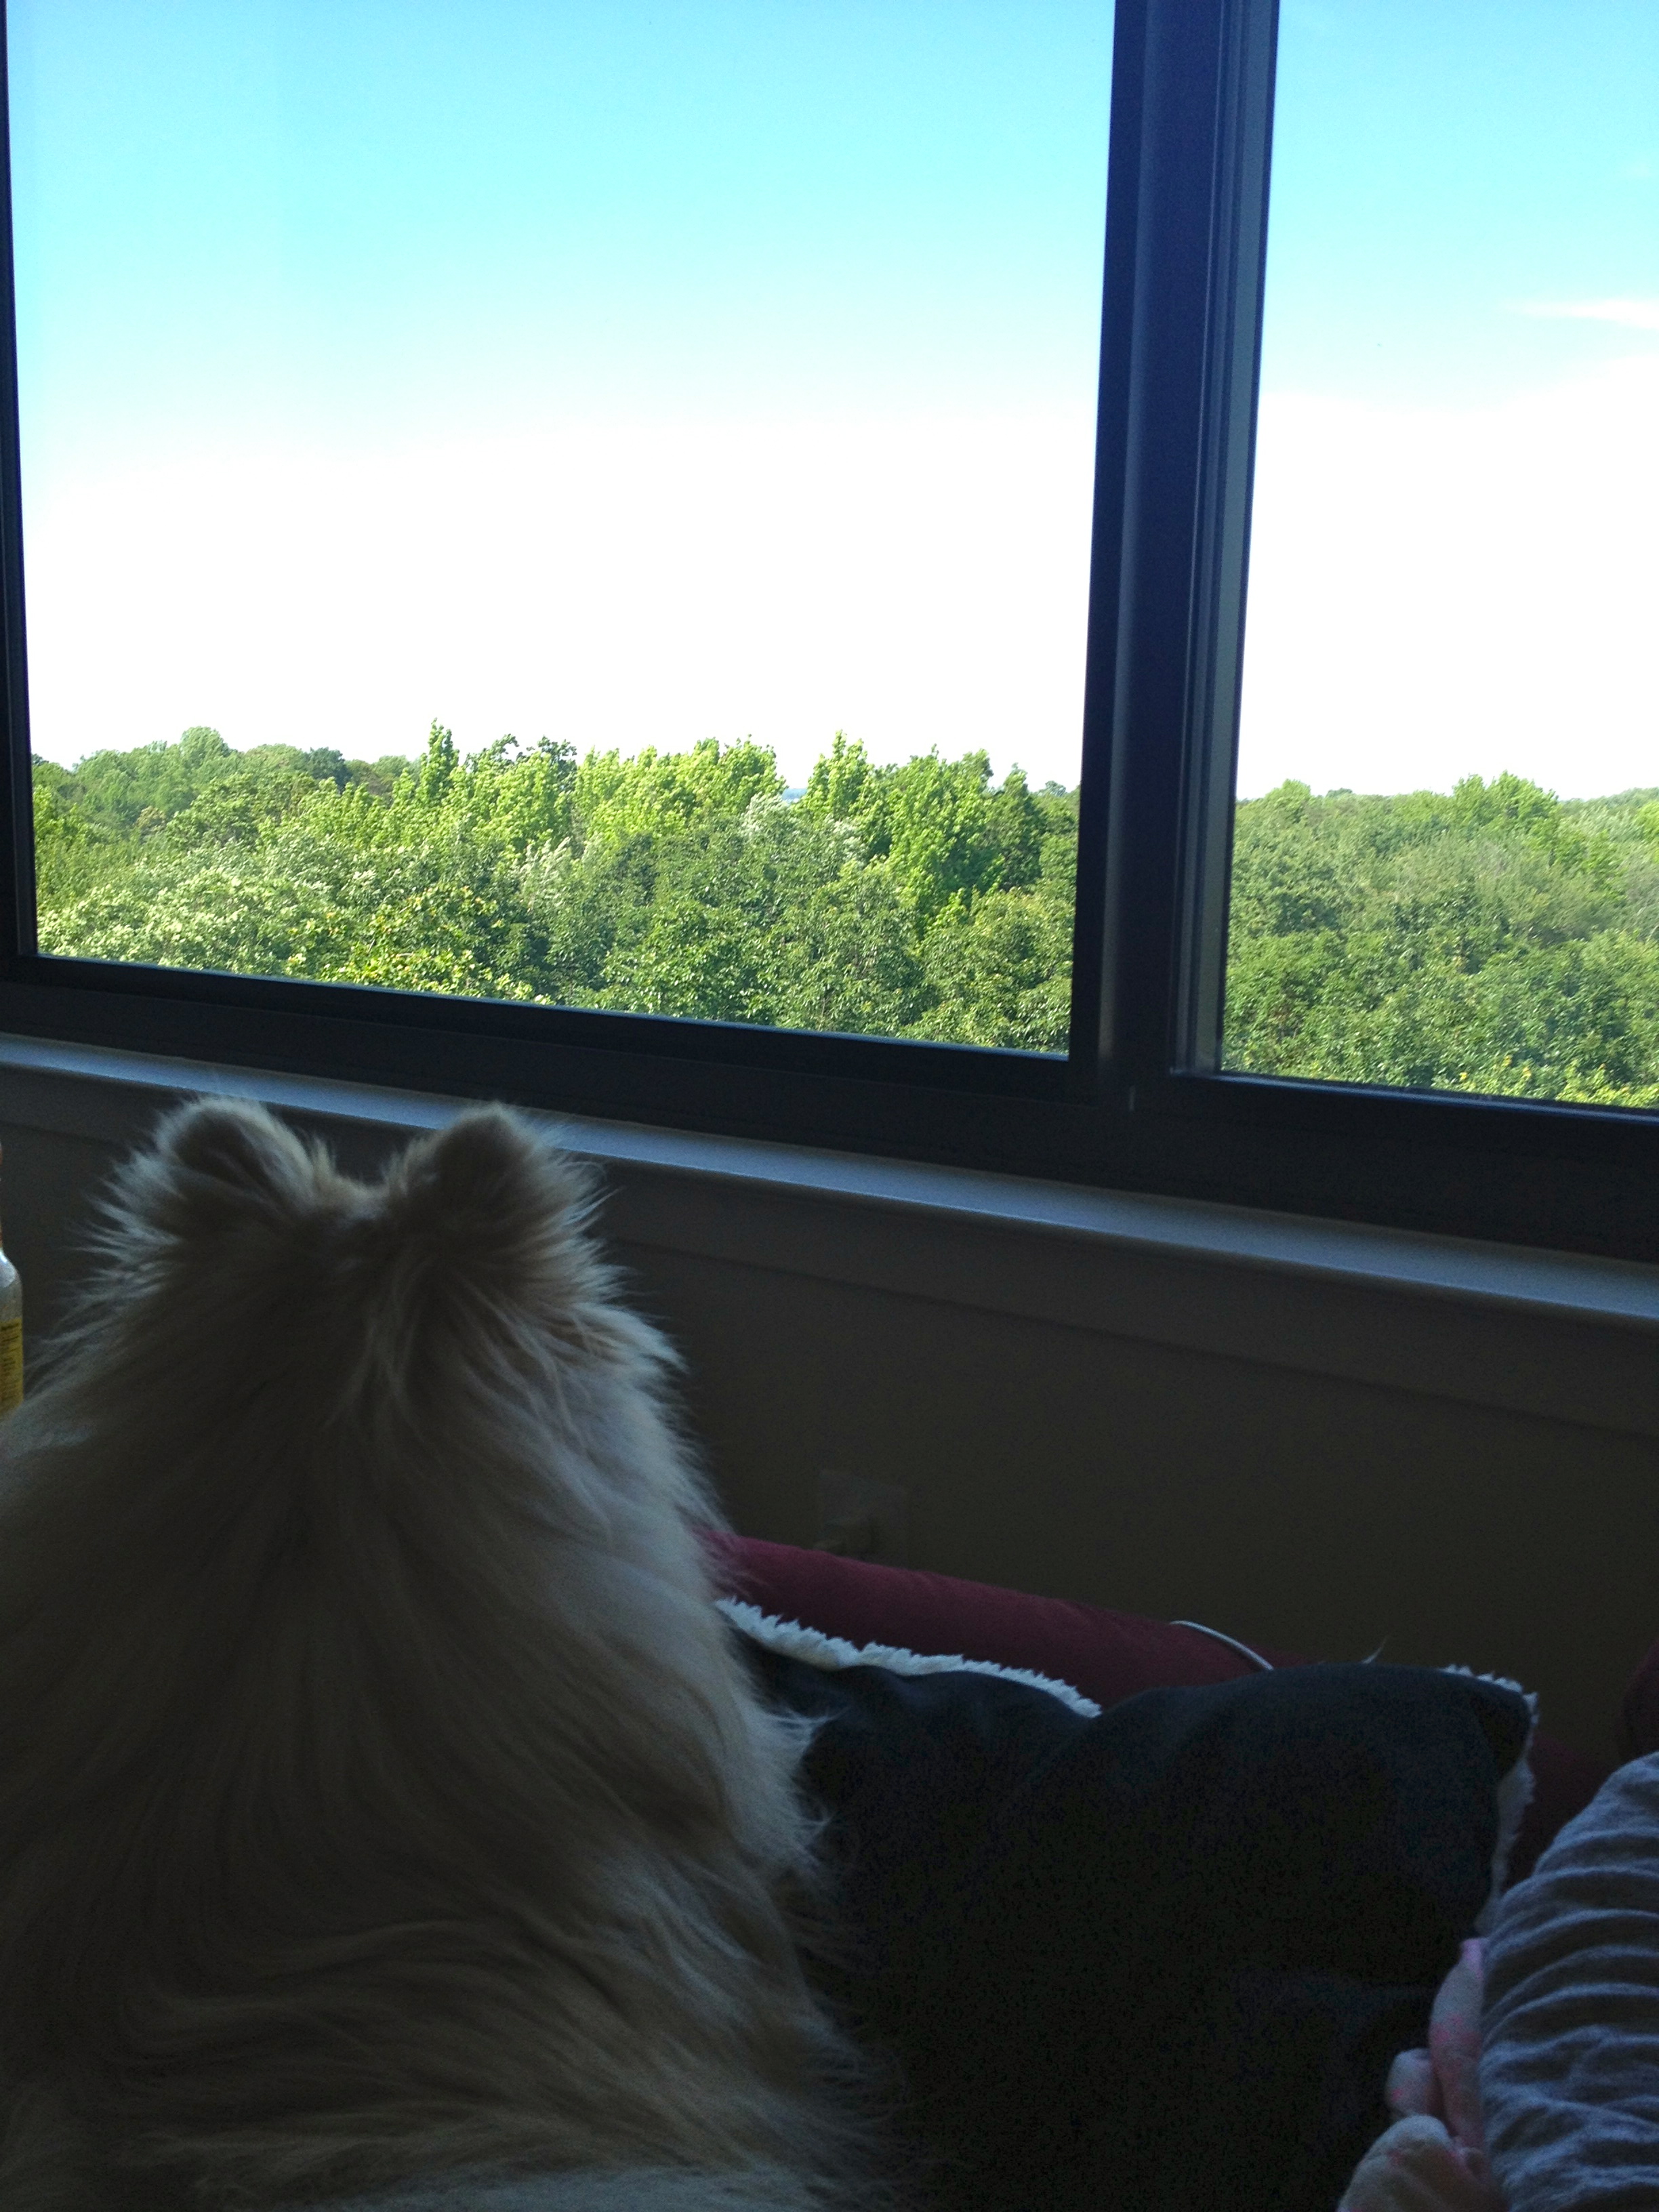 This is our view next to my recliner. She just adores sitting here and watching the birds and planes :)